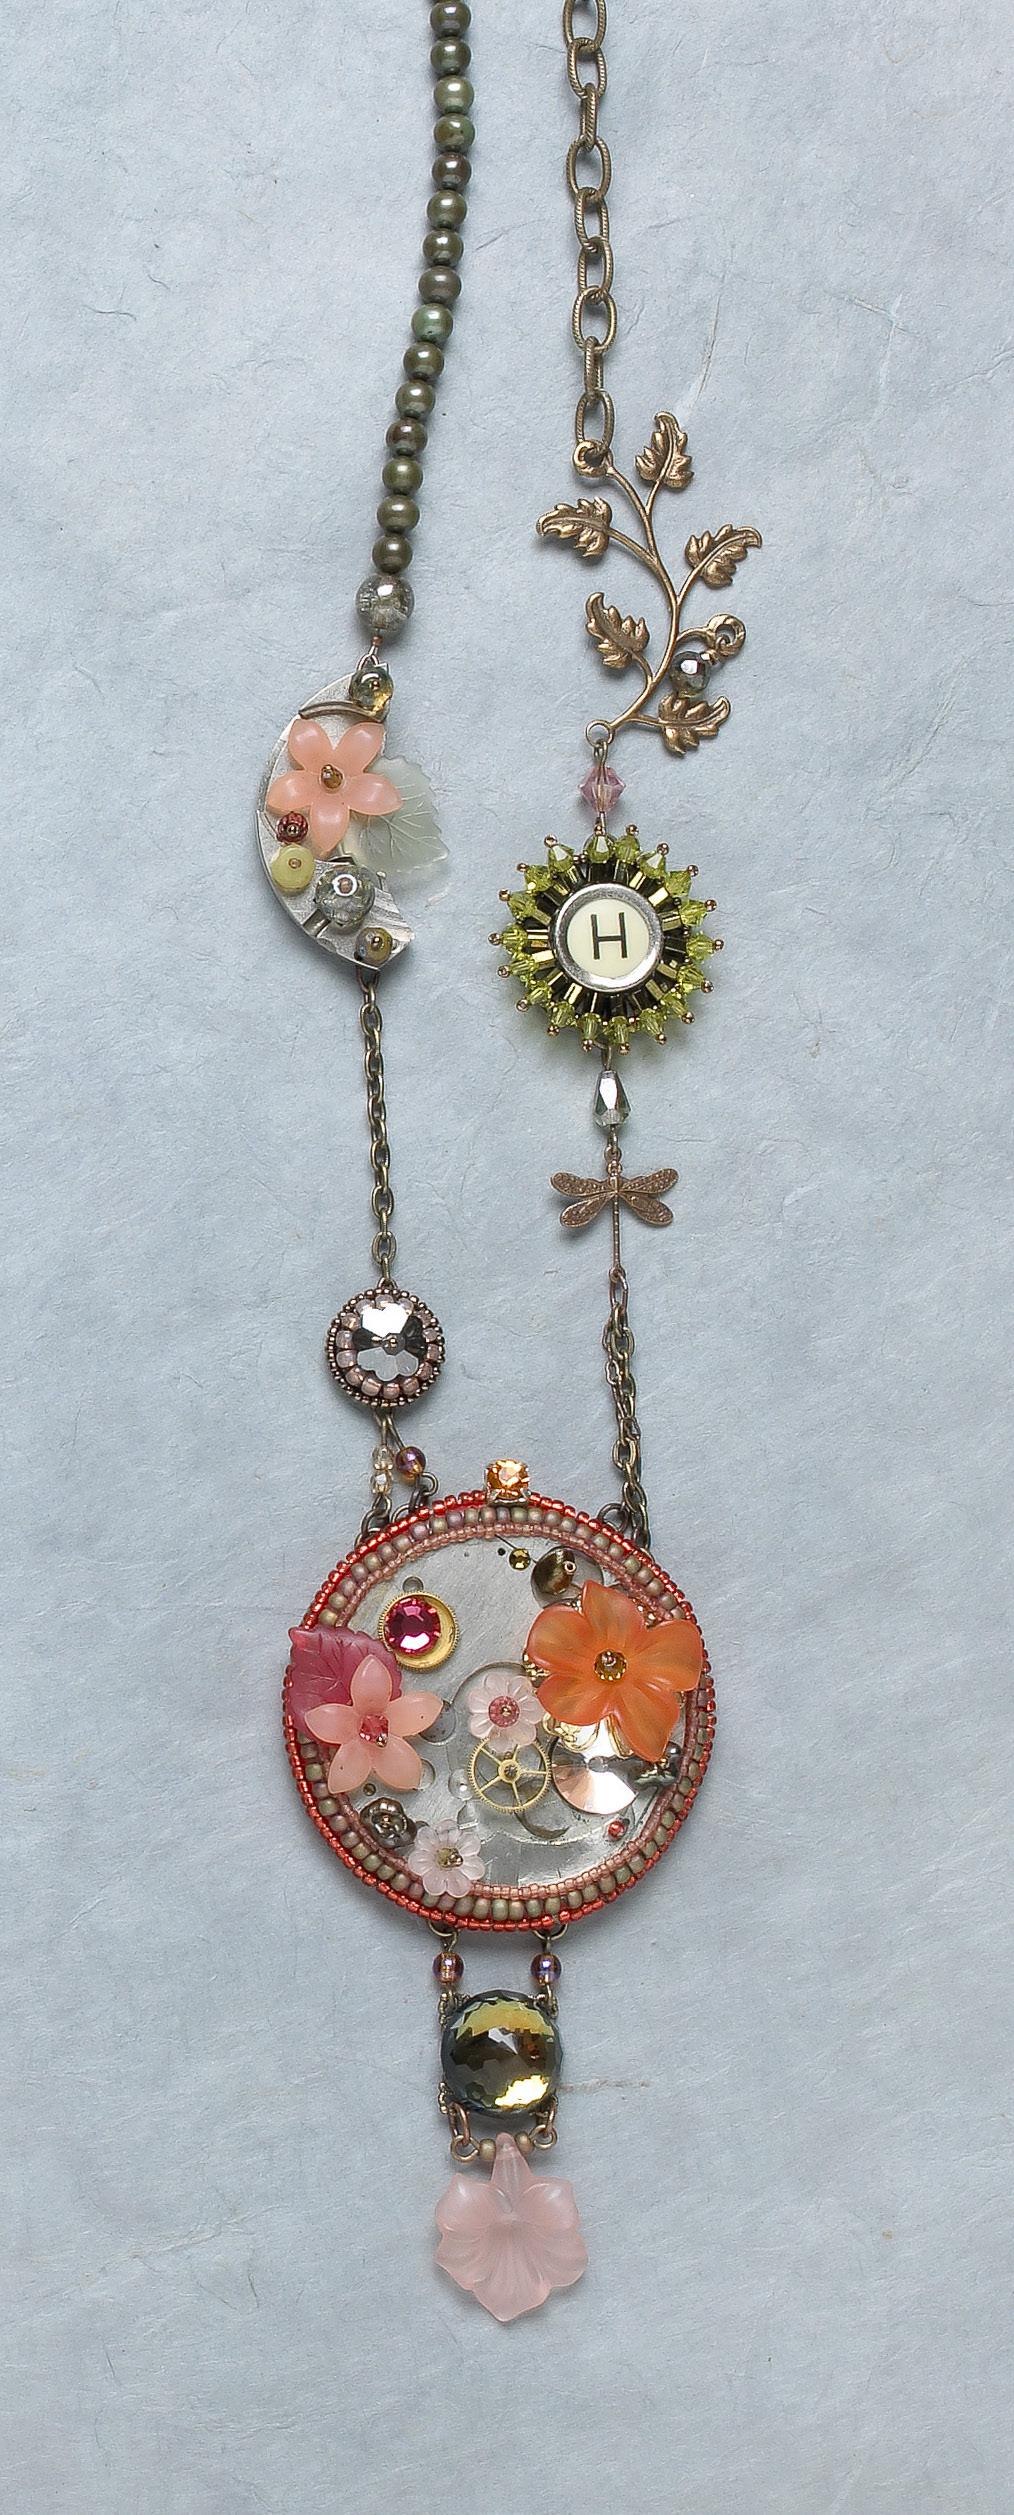 Designer Diane Hyde has combined her favorite beading techniques with the steampunk aesthetic, creating an elegantly eclectic look she calls beadpunk.